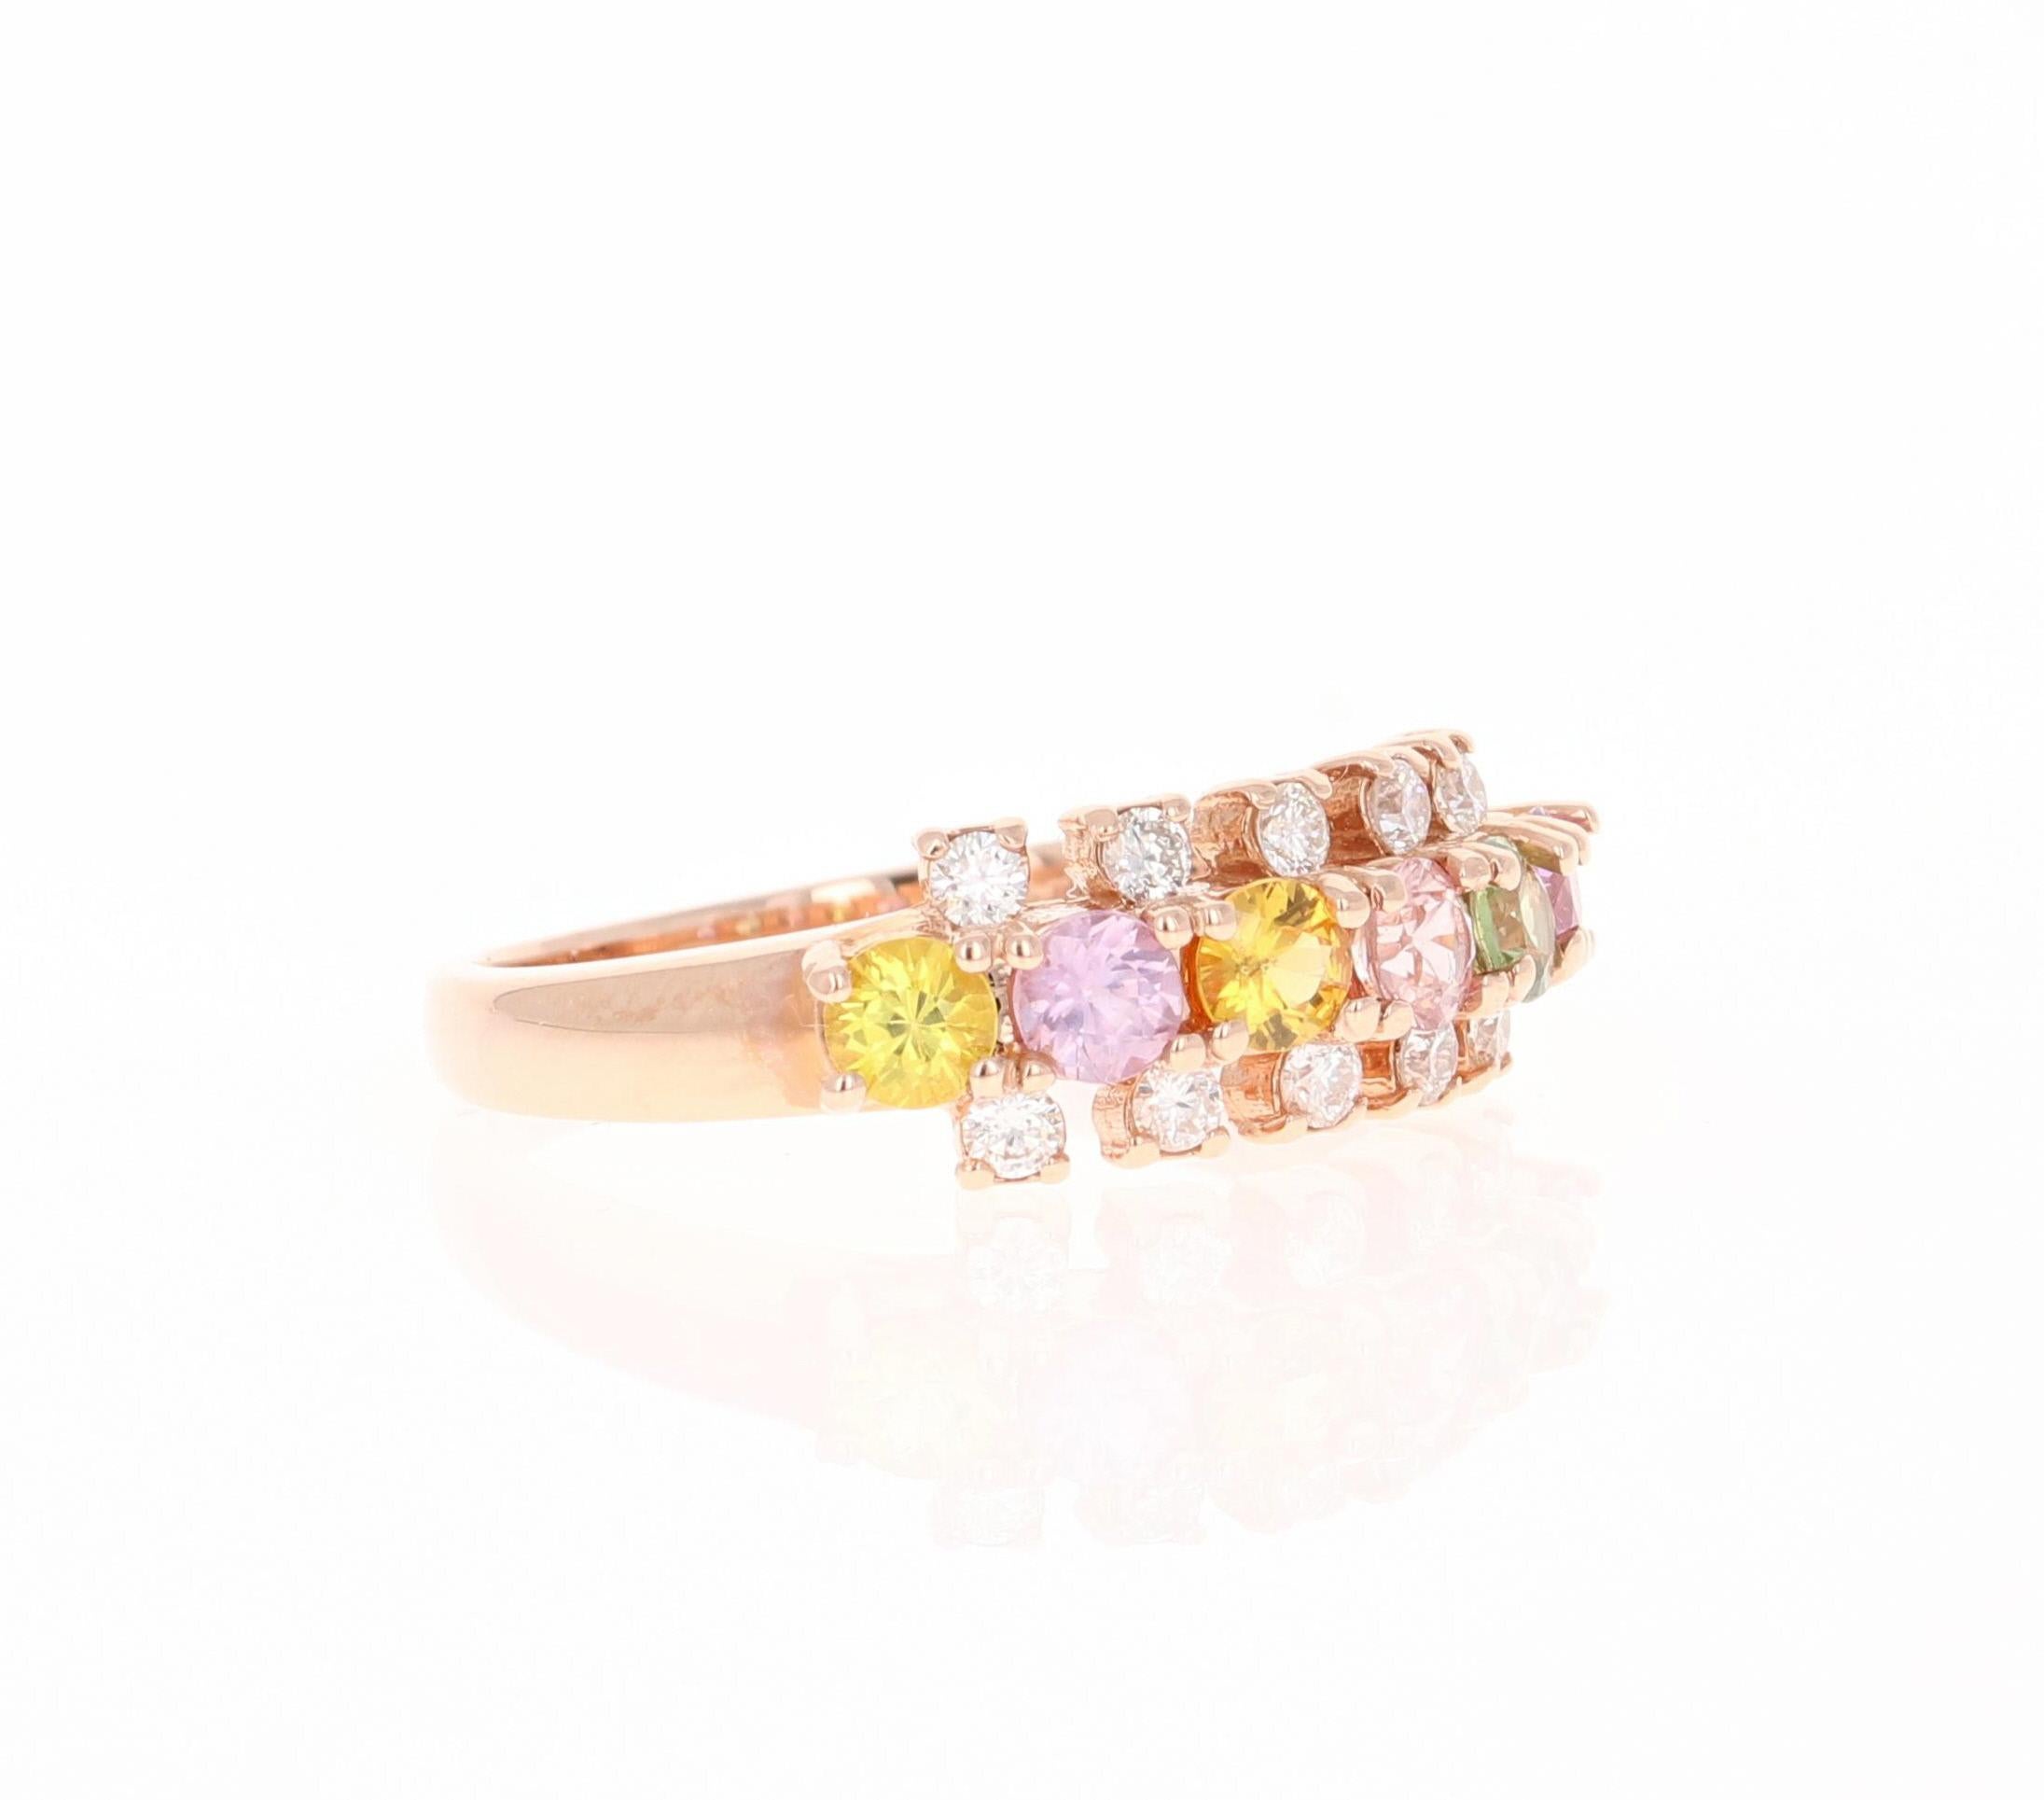 
This ring has 6 Round Cut Natural Multi-Colored Sapphires that weigh 0.95 Carats. It also has 10 Round Cut Diamonds that weigh 0.24 Carats. Clarity: VS and Color: H. The total carat weight of the ring is 1.19 Carats. 

The ring is beautifully set